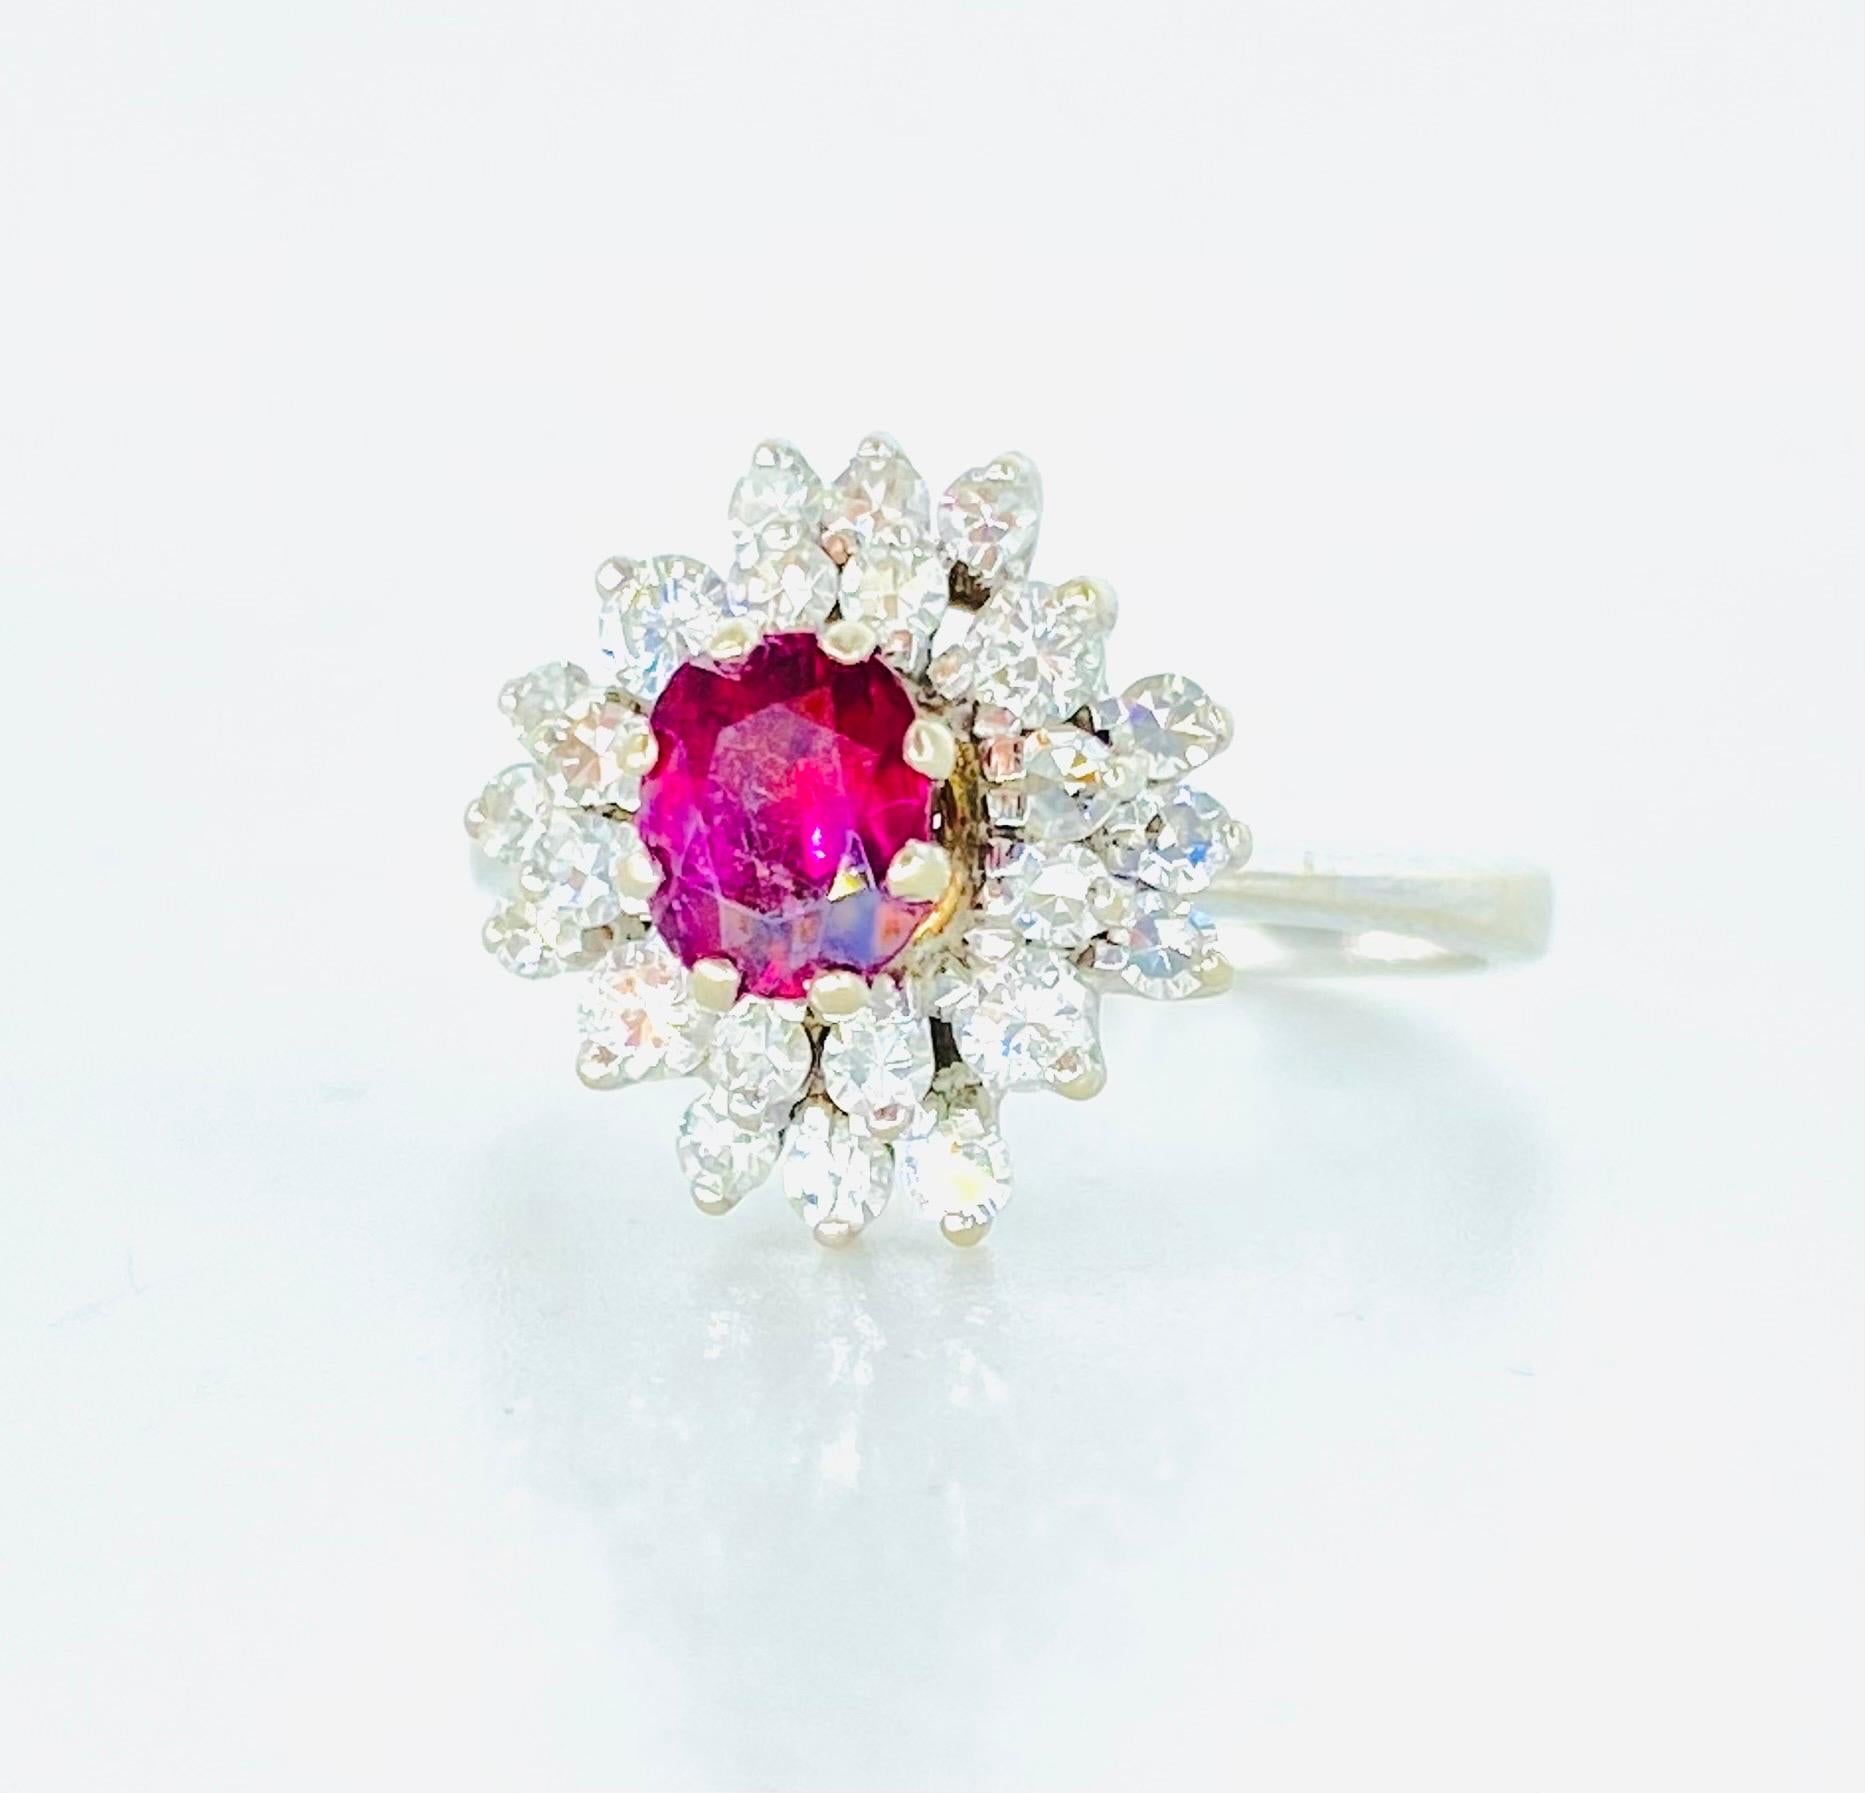 Vintage Ruby Center and Diamonds Surrounding Cluster Ring 18k White Gold. The ring measures 13mm By 12.80mm. Beautiful sparkling with a lot of diamond life. The diamonds featured are natural old miner diamonds that weight approx total of 0.75ct. The